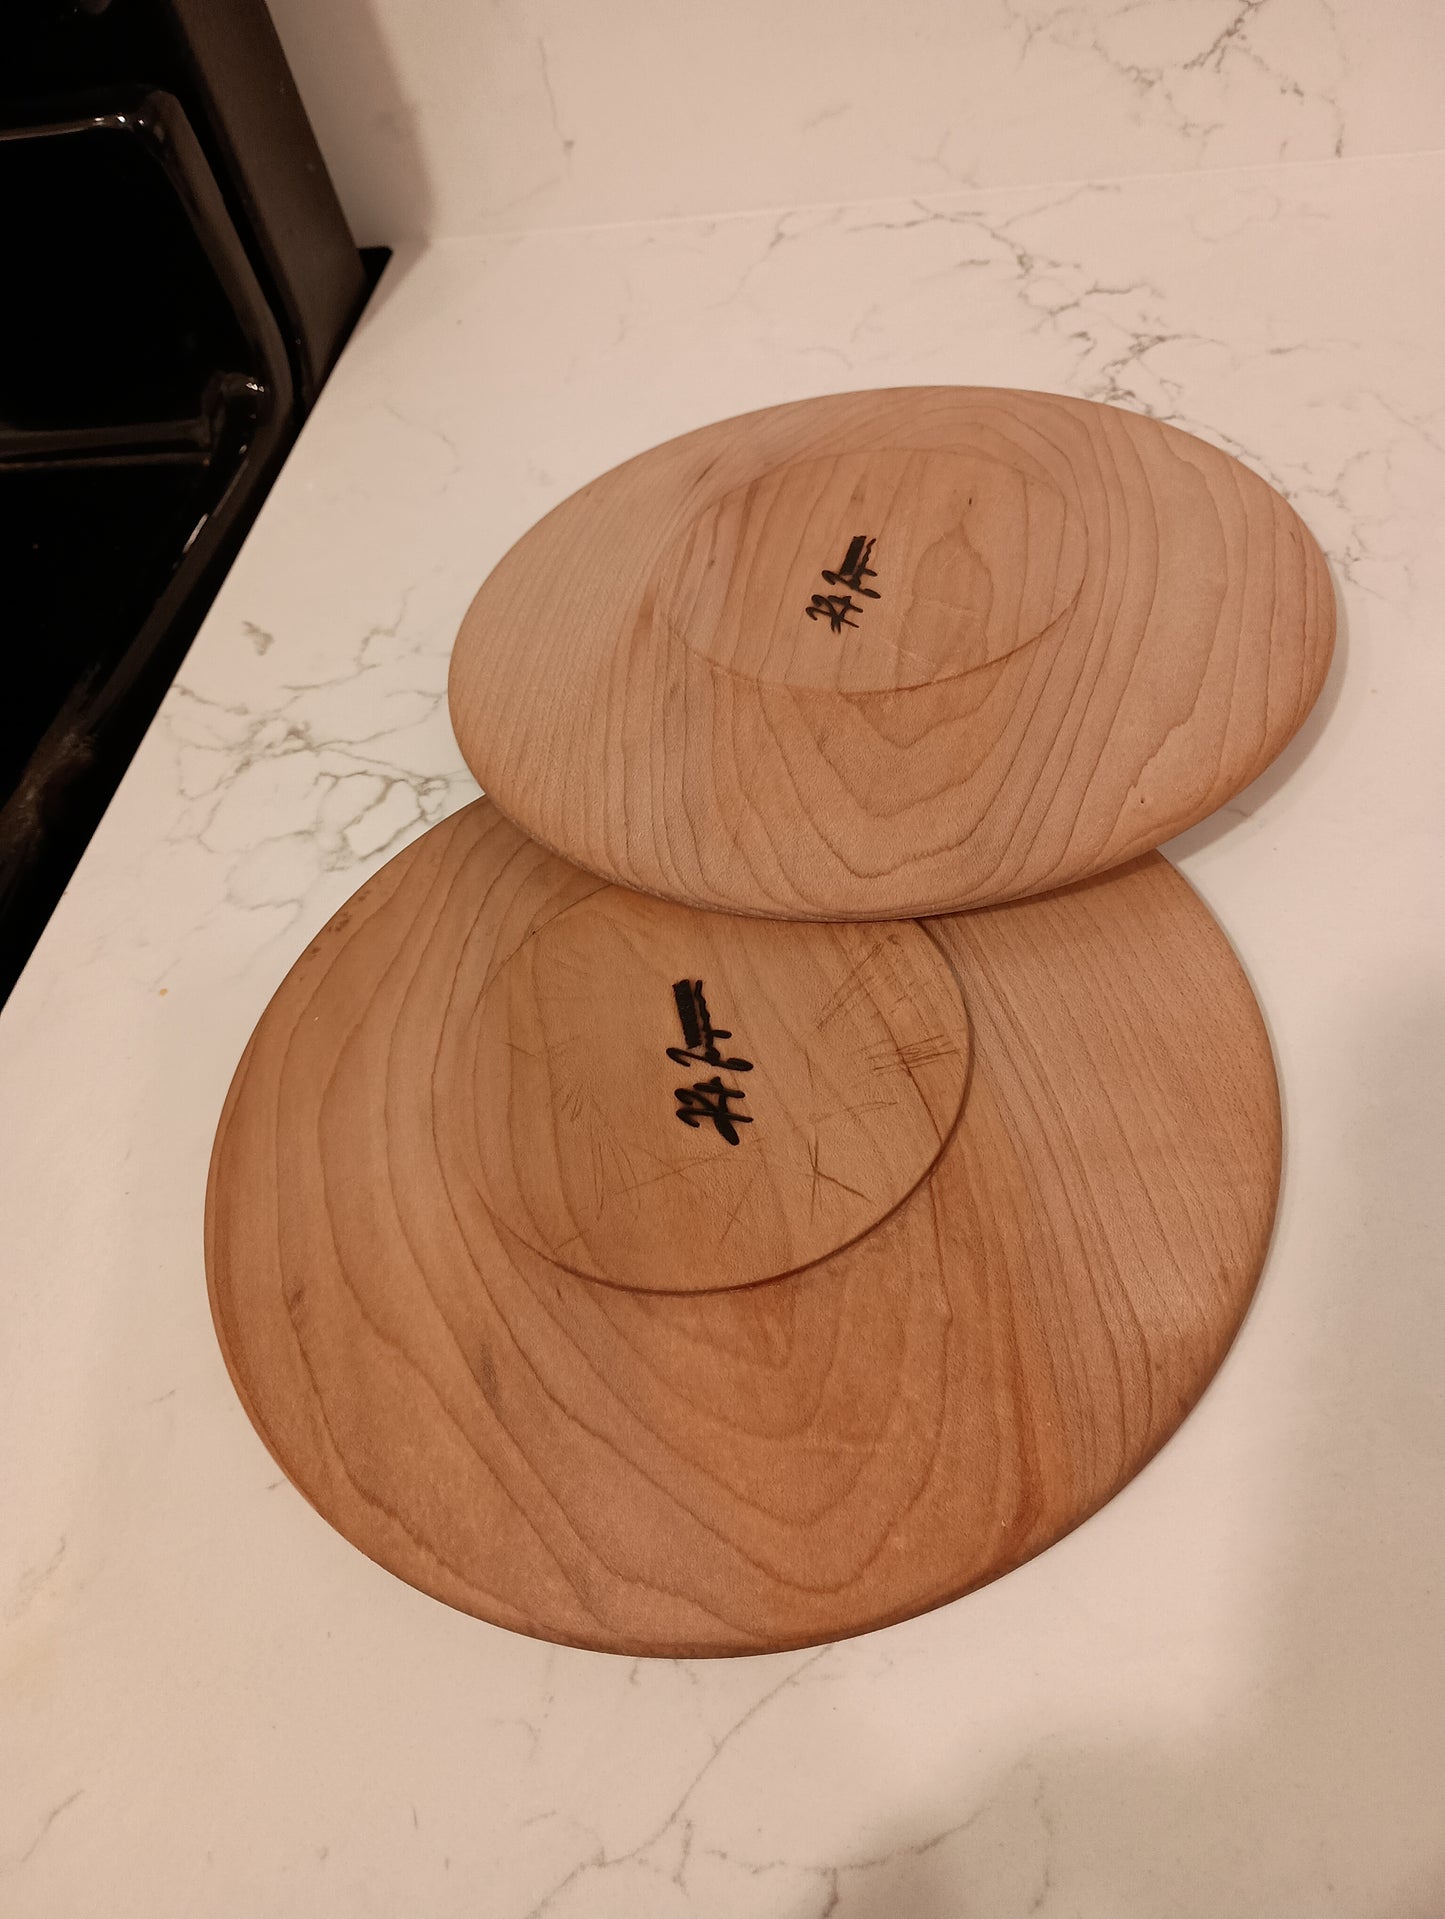 Set of Two Maple Plates, American Revolutionary War Trencher Style